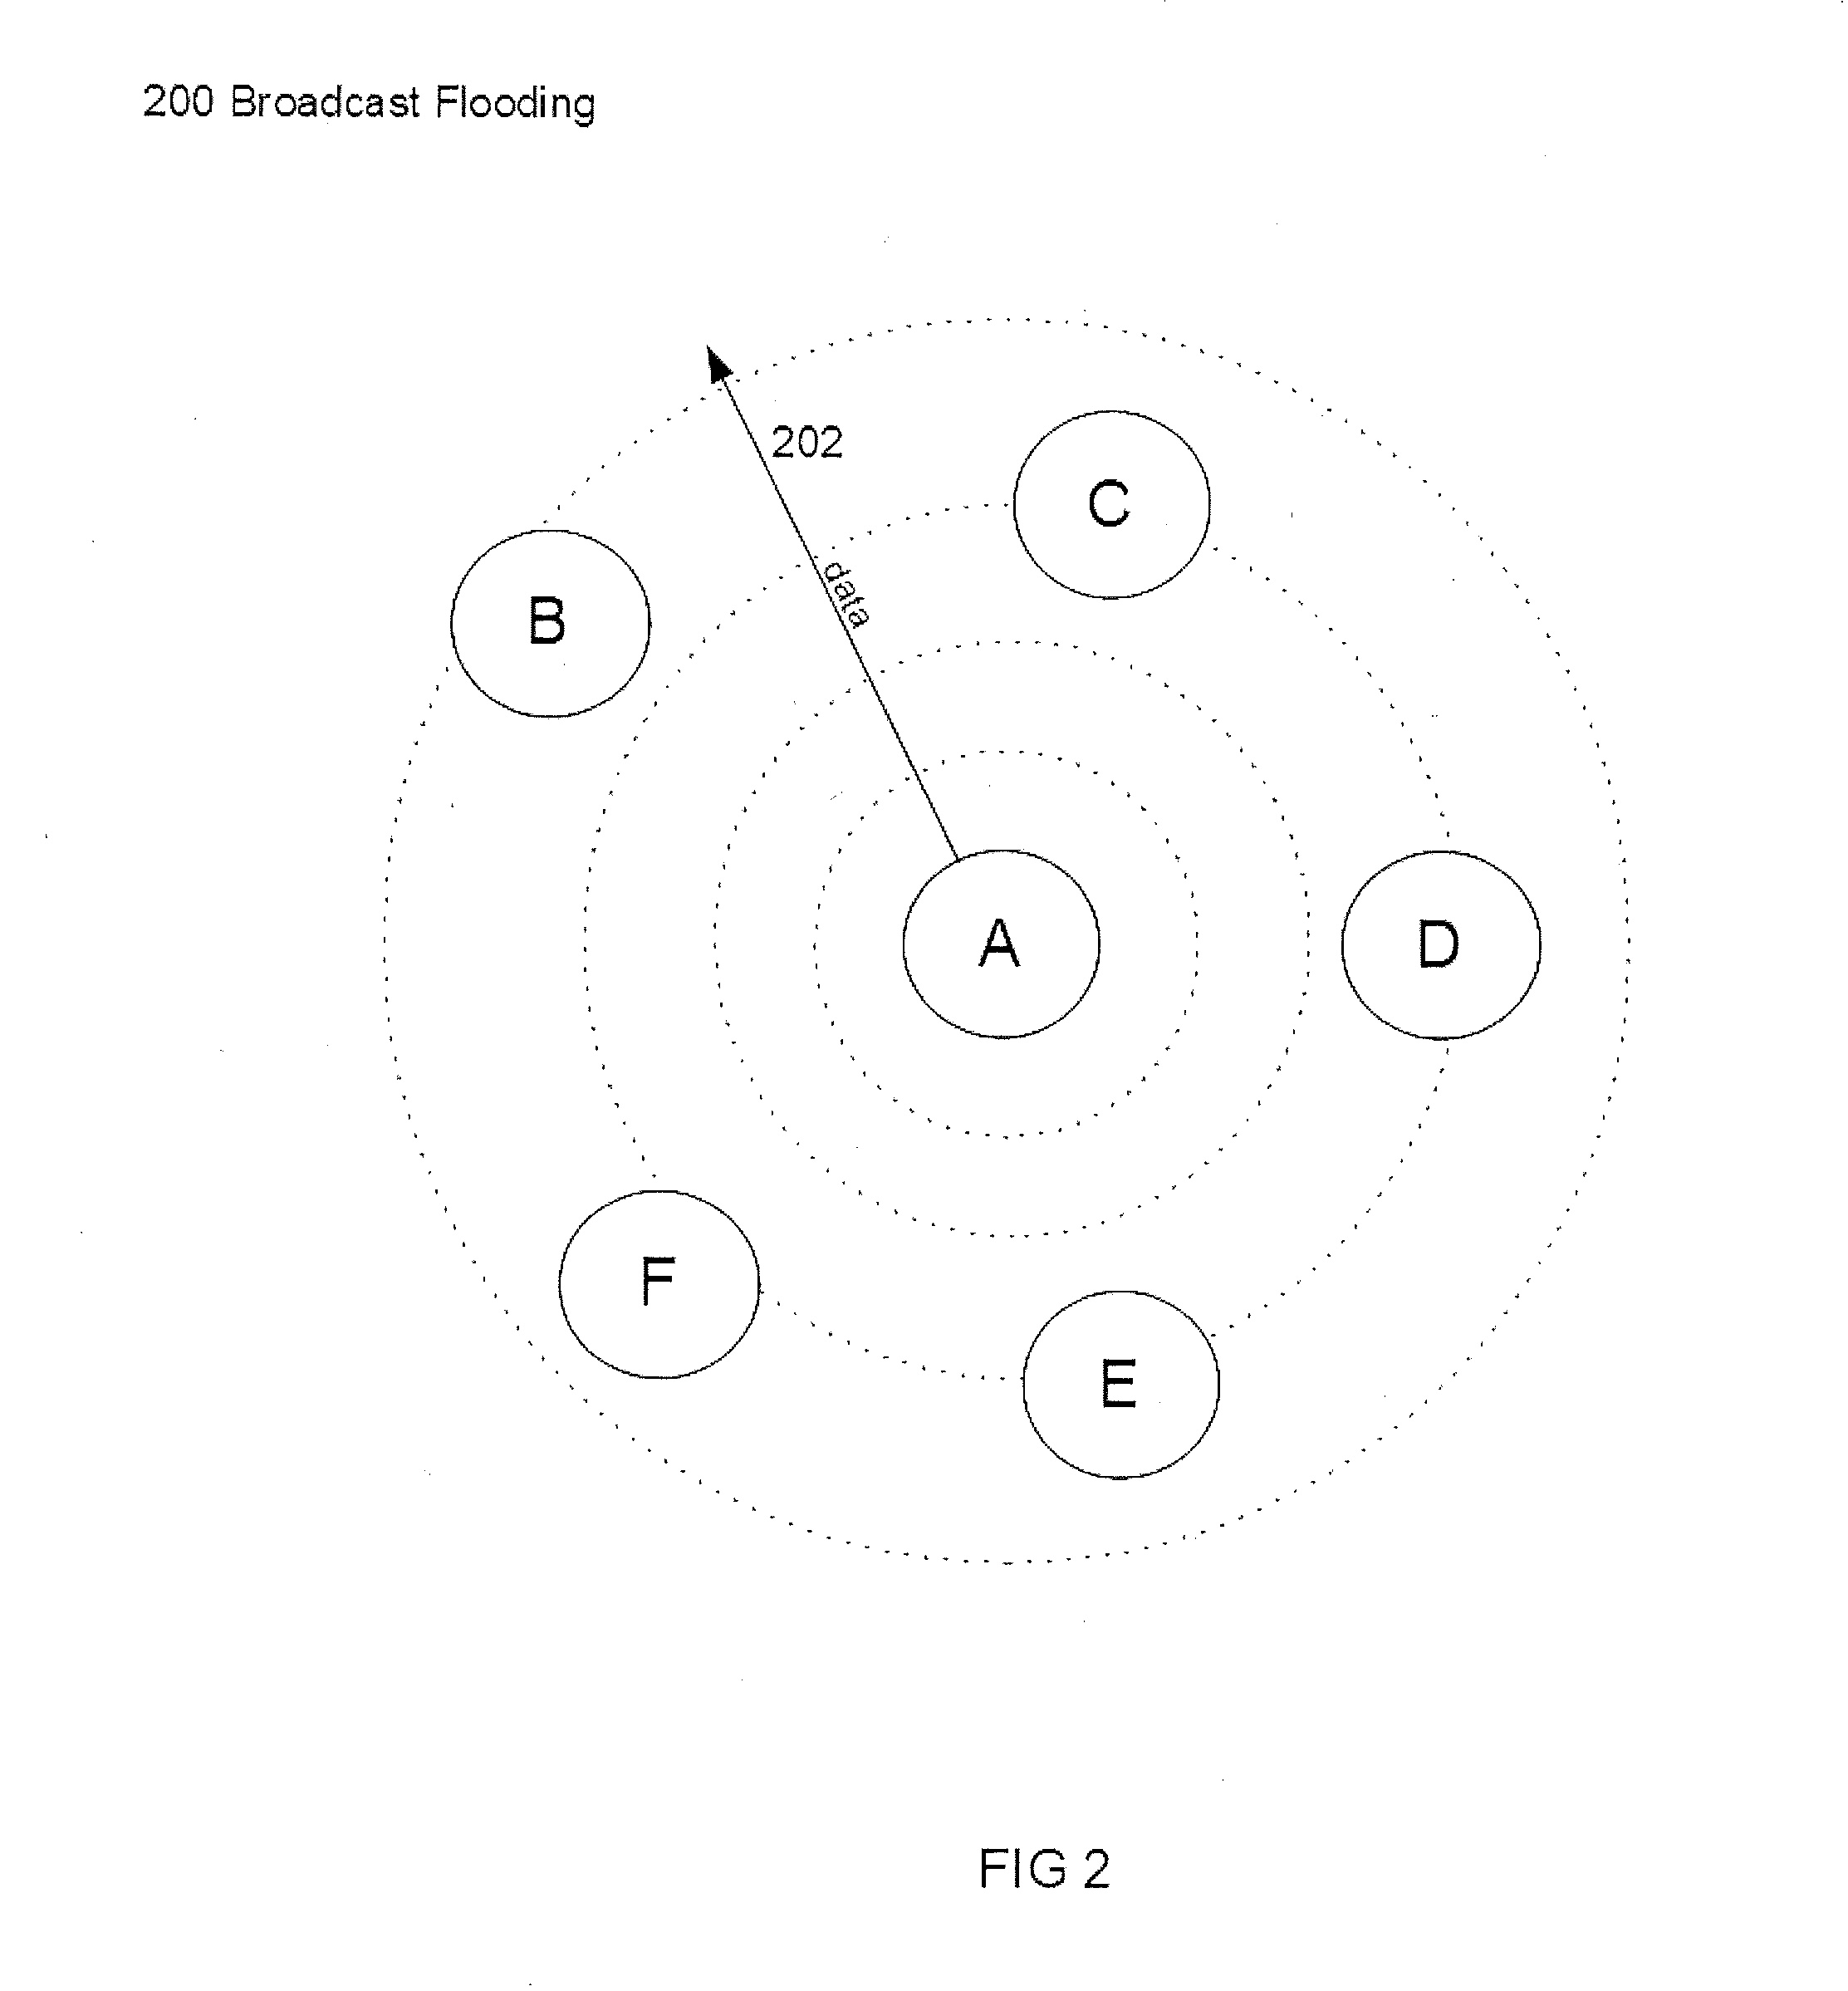 Method for controlling flood broadcasts in a wireless mesh network